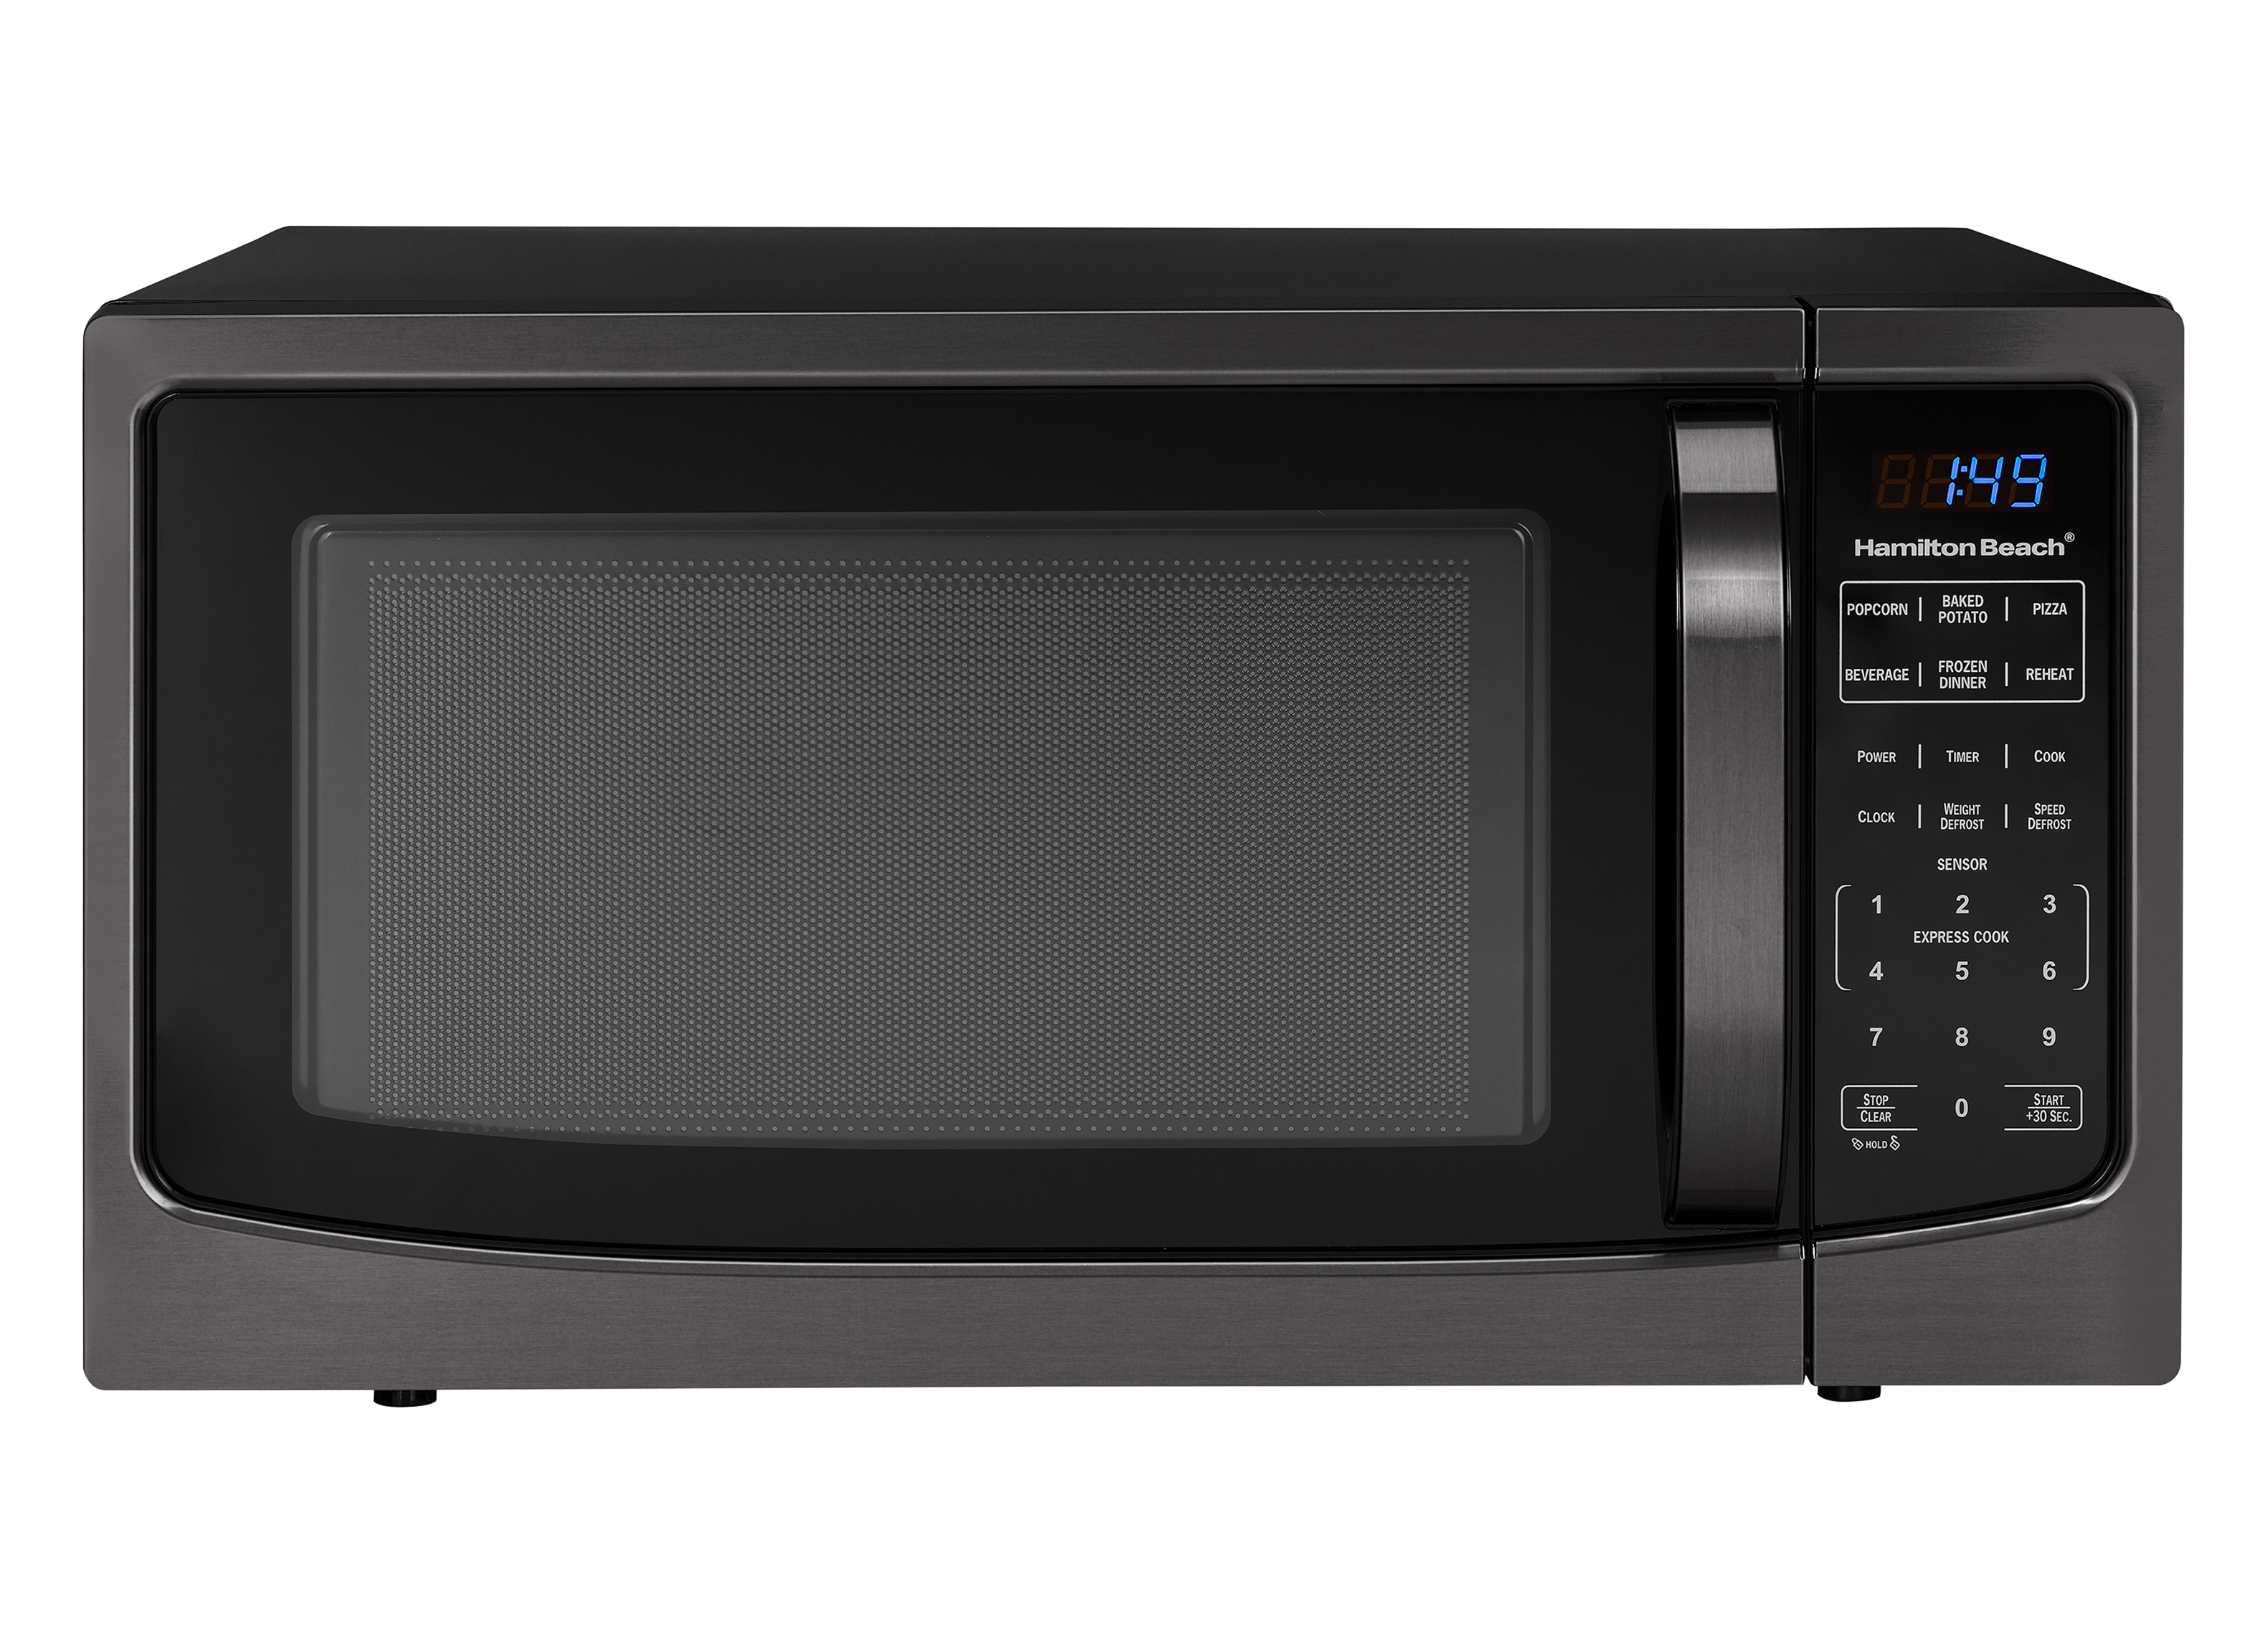 How to Make a Hamilton Beach Microwave Silent: Quiet Tips